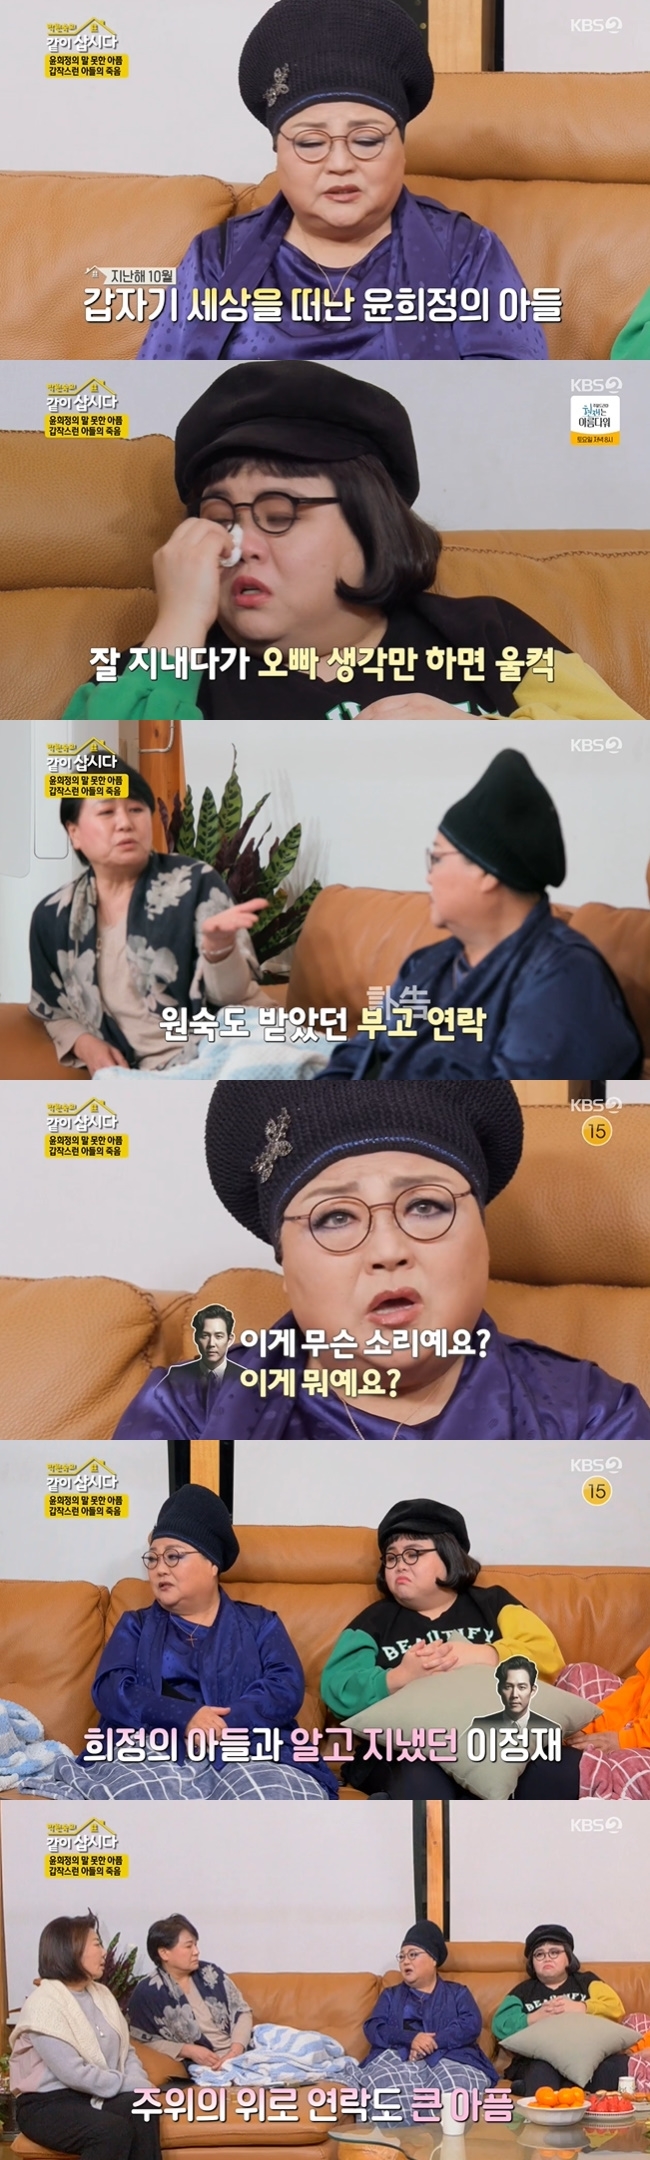 Yoon Hee-jung mentioned the death of his son, who was so vain that people around him could not believe it.On KBS 2TV Lets Live With Park Won-sook Season 3, which aired on April 6, Yoon Hee-jung appeared with her daughter Kim su-yeon and recalled the moment she had a hard time with her sons death last year.While having a good time with Yoon Hee-jung and Kim su-yeon, Hye Eun Yi said, I was worried that Hee-jung would come to my sister. Chest was sick.Yoon confessed, Ive never laughed before, its so good. Its been so hard for three to four months. Yoons son died of a heart attack in October last year.When Kim su-yeons eyes were reddened, Hye Eun Yi said, Suyeon was hard, too, and if she was so sad, she would be sad.Yoon Hee-jung said, I am a little good, but Su-yeon is so hard because of it. I did not have such a brother and sister. Kim su-yeon said that he had a lot of will to his poisonous brother.Yoon Hee-jung said that when he went out to his sons request, he suddenly fell on the road with a feeling that he had pushed, and as soon as he returned home, he heard the news of his sons death.Yoon Hee-jungs Chest, who cried without any doubt in the unbelievable news at the time, had a black bruise of egg size.Park Won-sook said, I received a obituary message and called Hye Eun Yi because I did not understand what this is.Then all the calls came to me, and they didnt come out very soon, explained Hye Eun Yi.Thats when the Squid Game was popular, said Yoon Hee-jung, and Lee Jung-jae said, What are you talking about? Ive seen him in a neighborhood since I was a kid with my son.Its ridiculous, what do you mean? Lee Jung-jae said.I couldnt bear that because dozens of people called me, he said. I thought I should live after three to four months.I thought I should live hard for my son. 